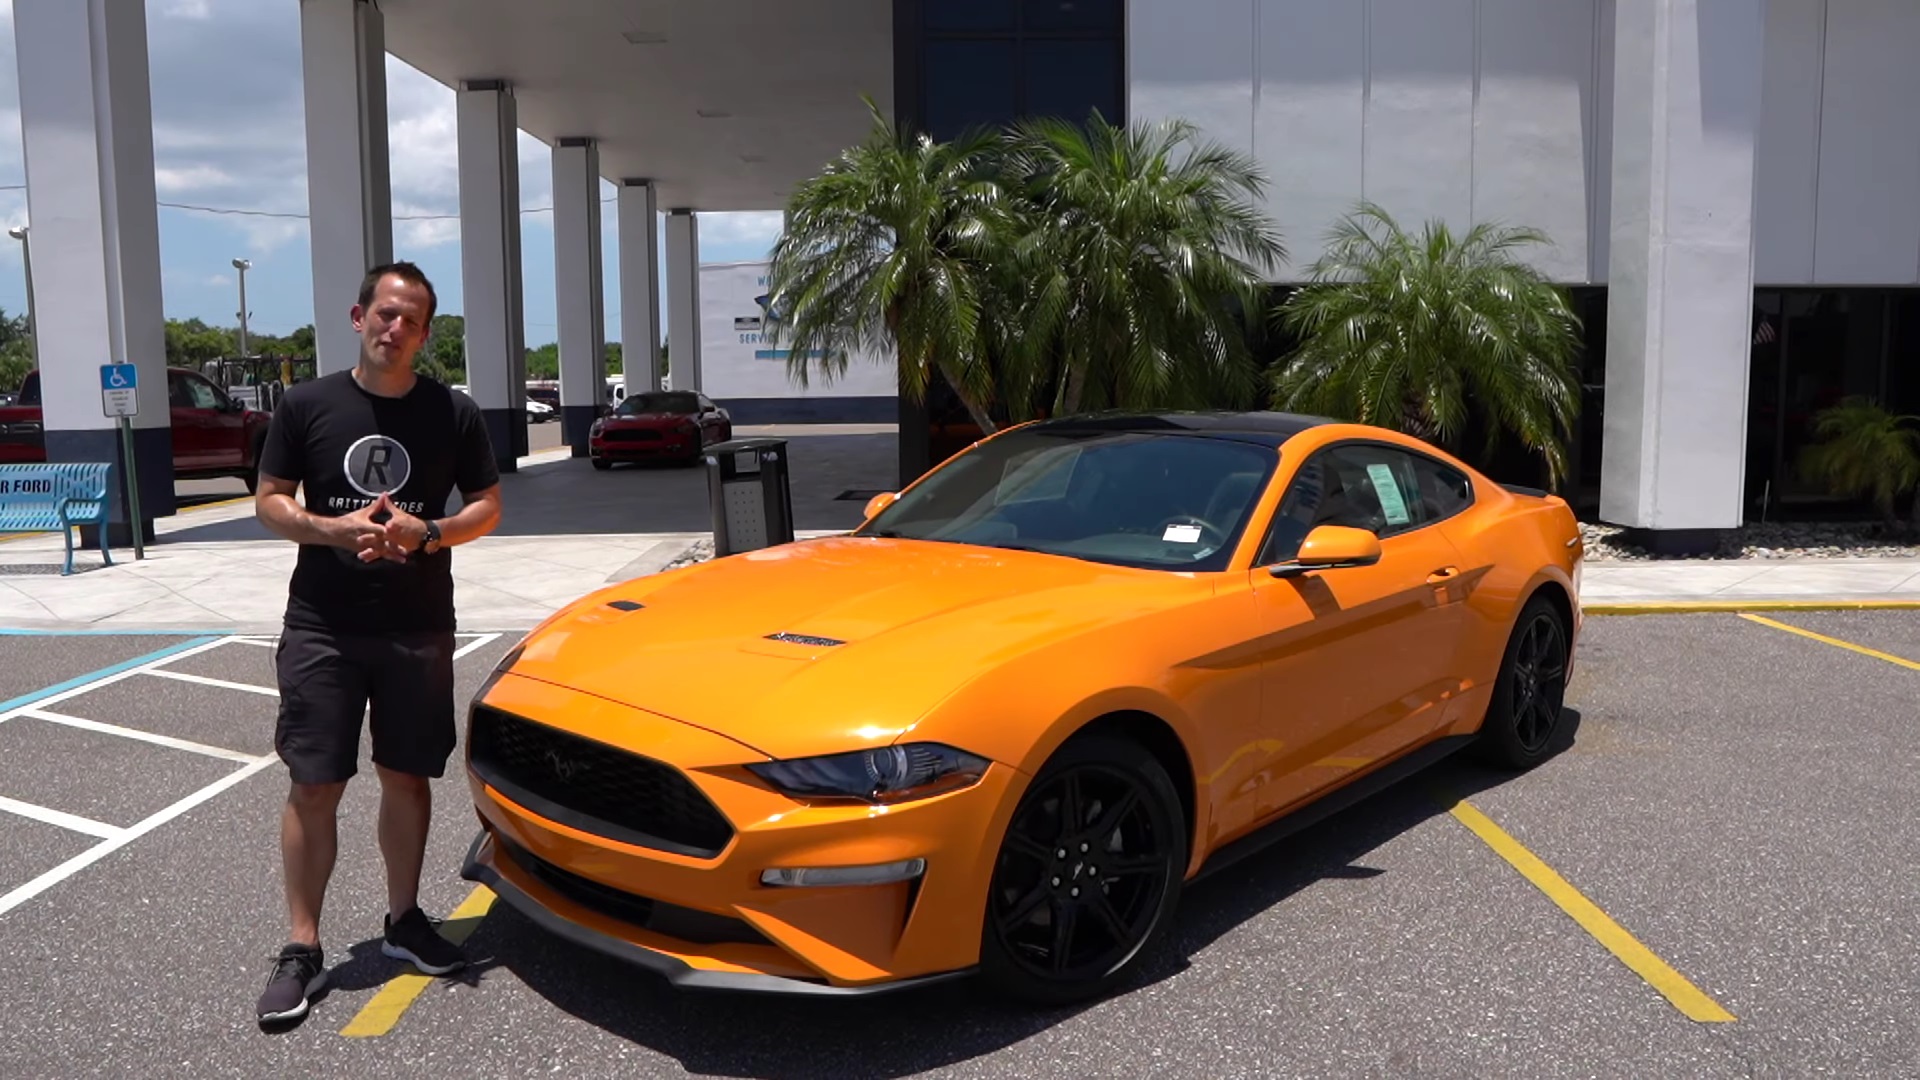 Video: 2019 Ford Mustang EcoBoost - Good or Bad?